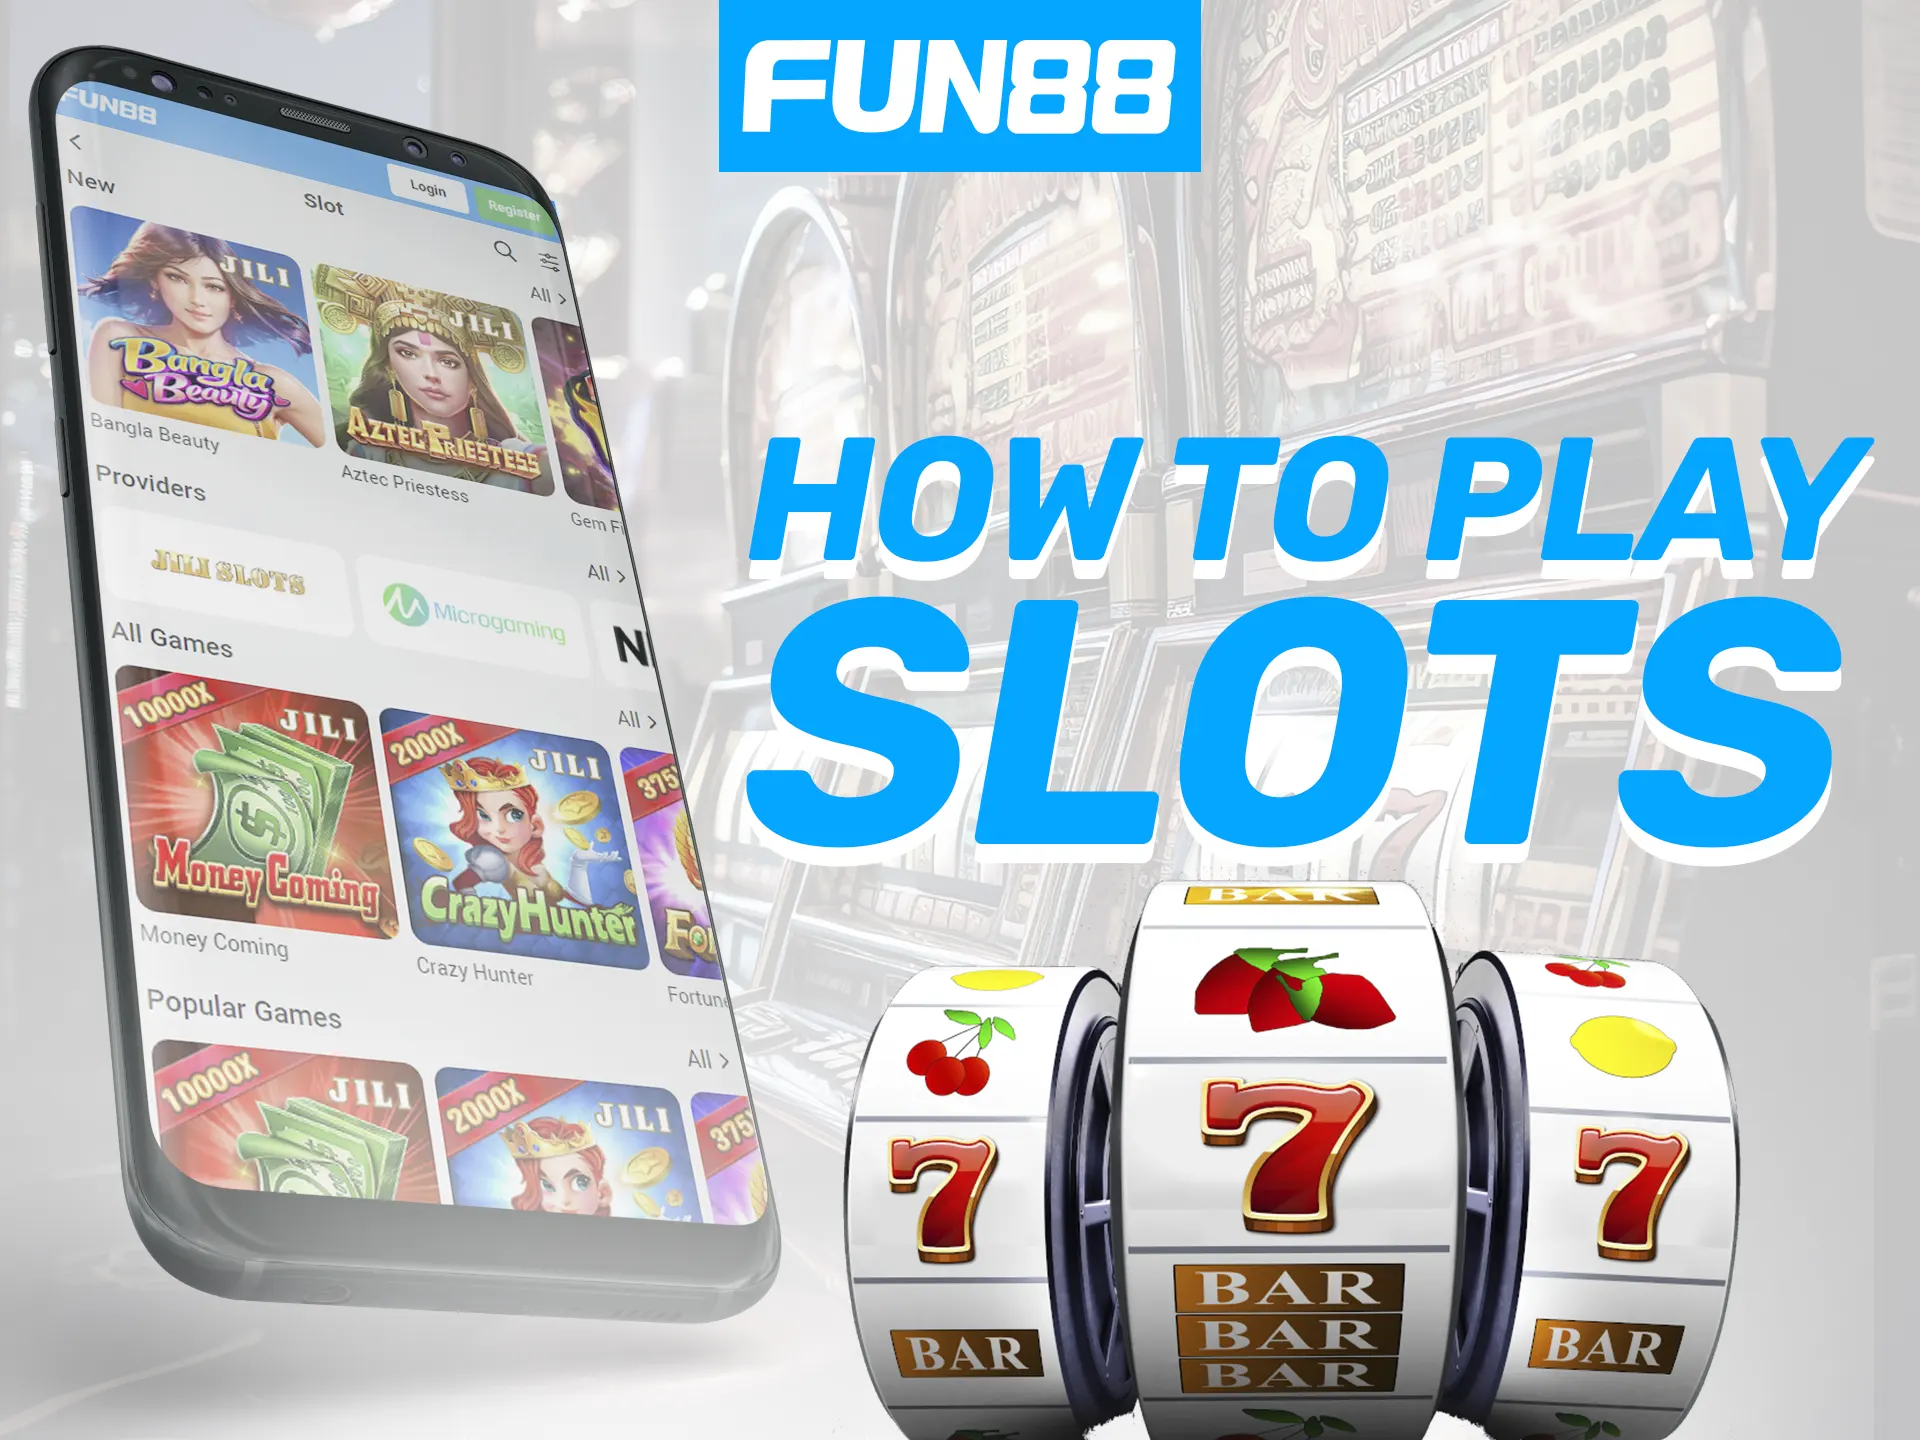 Find out how to start playing slots at Fun88.